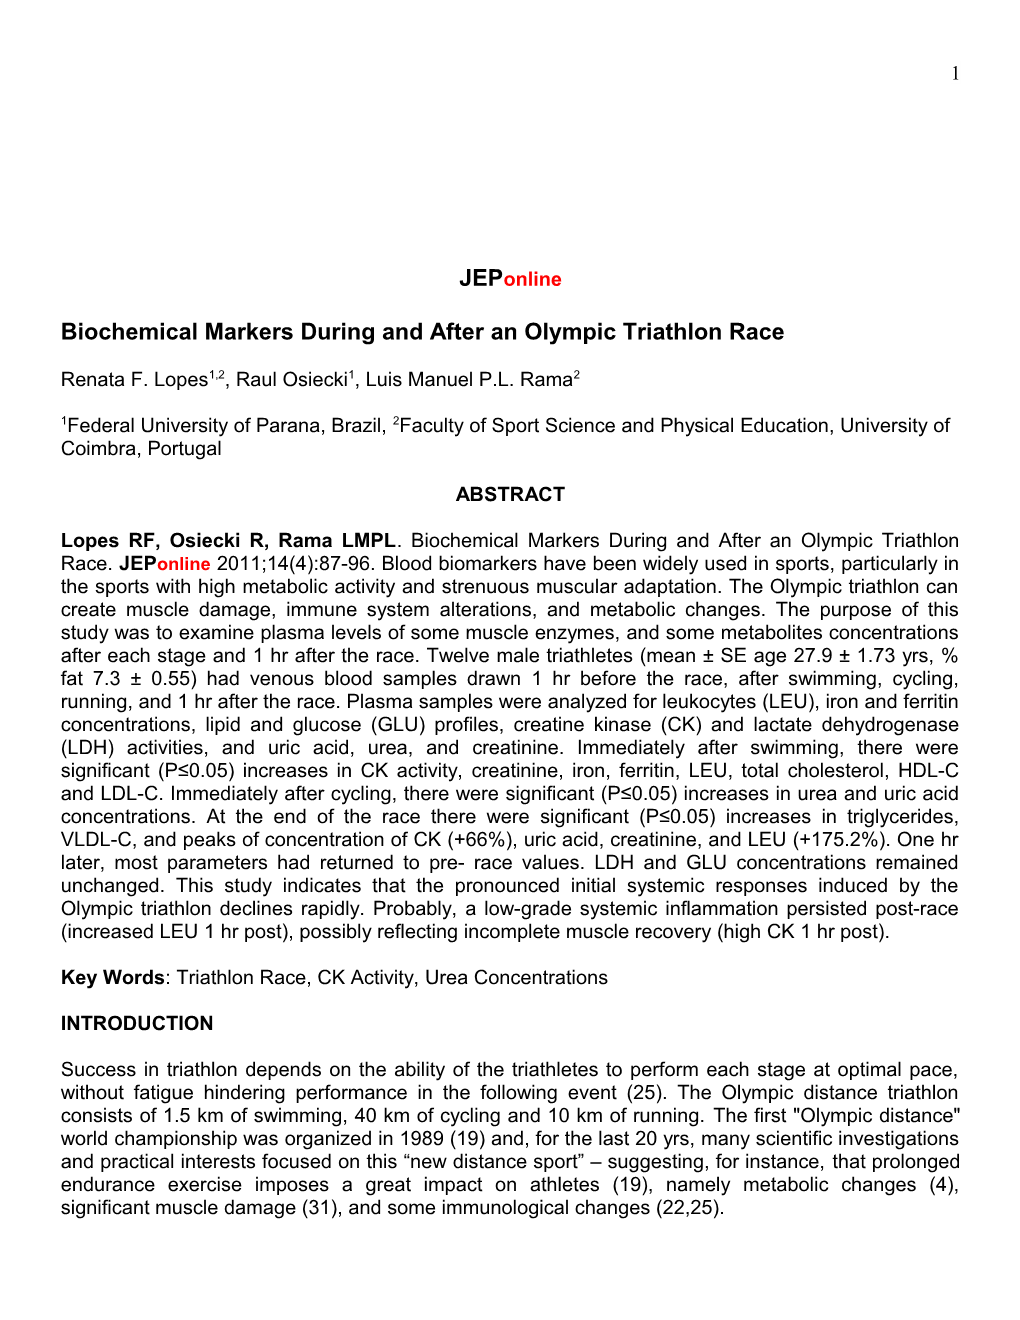 Biochemical Markers During and After an Olympic Triathlon Race